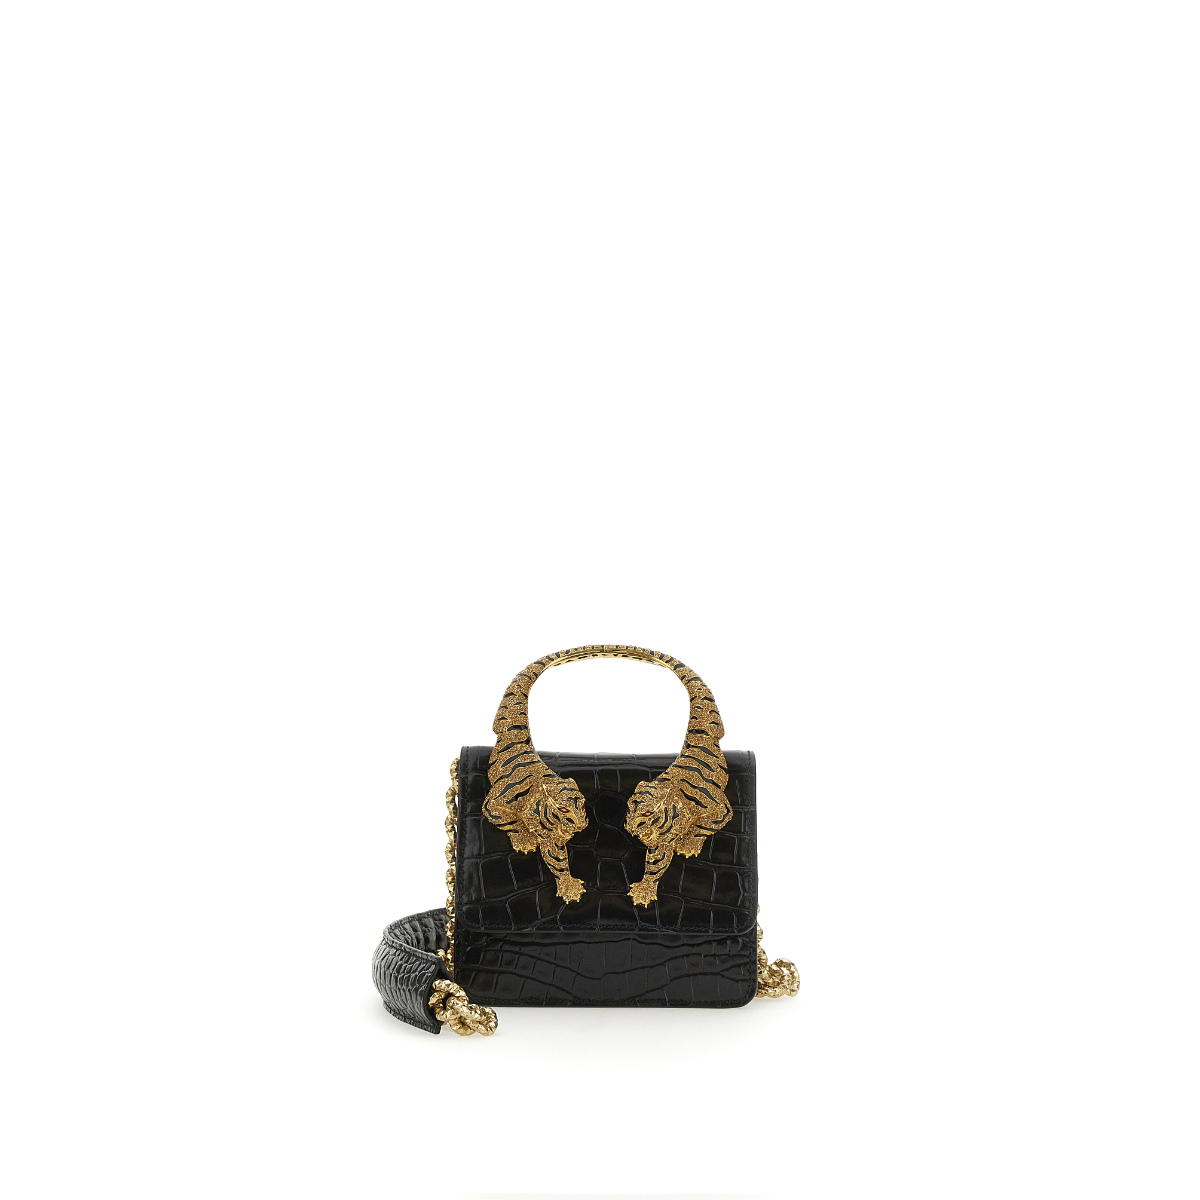 Roberto Cavalli Unveiled Its New IT-accessory: The Roar Bag